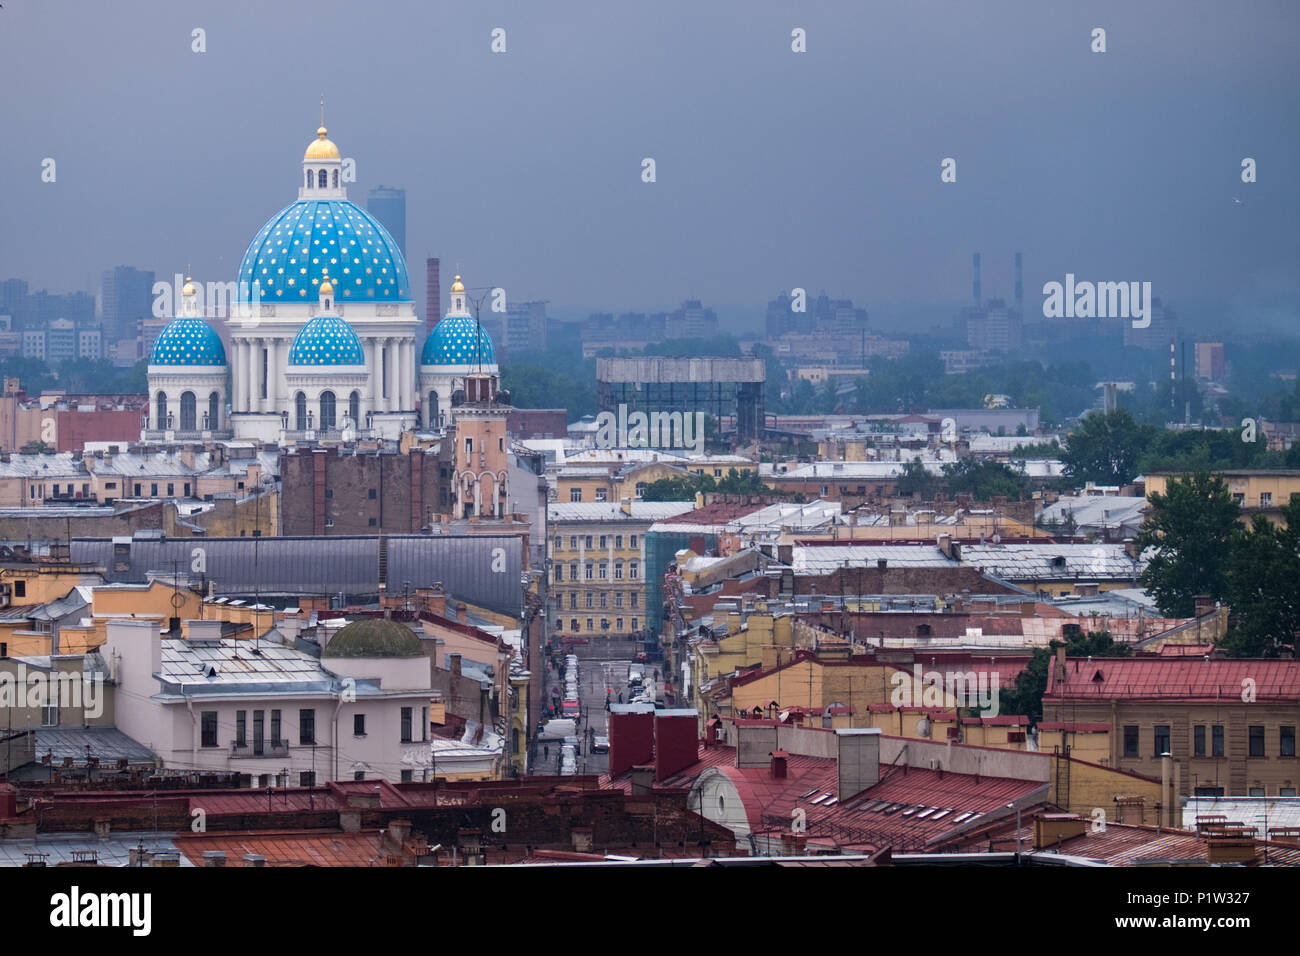 Russian church and city buildings on overcast day Stock Photo